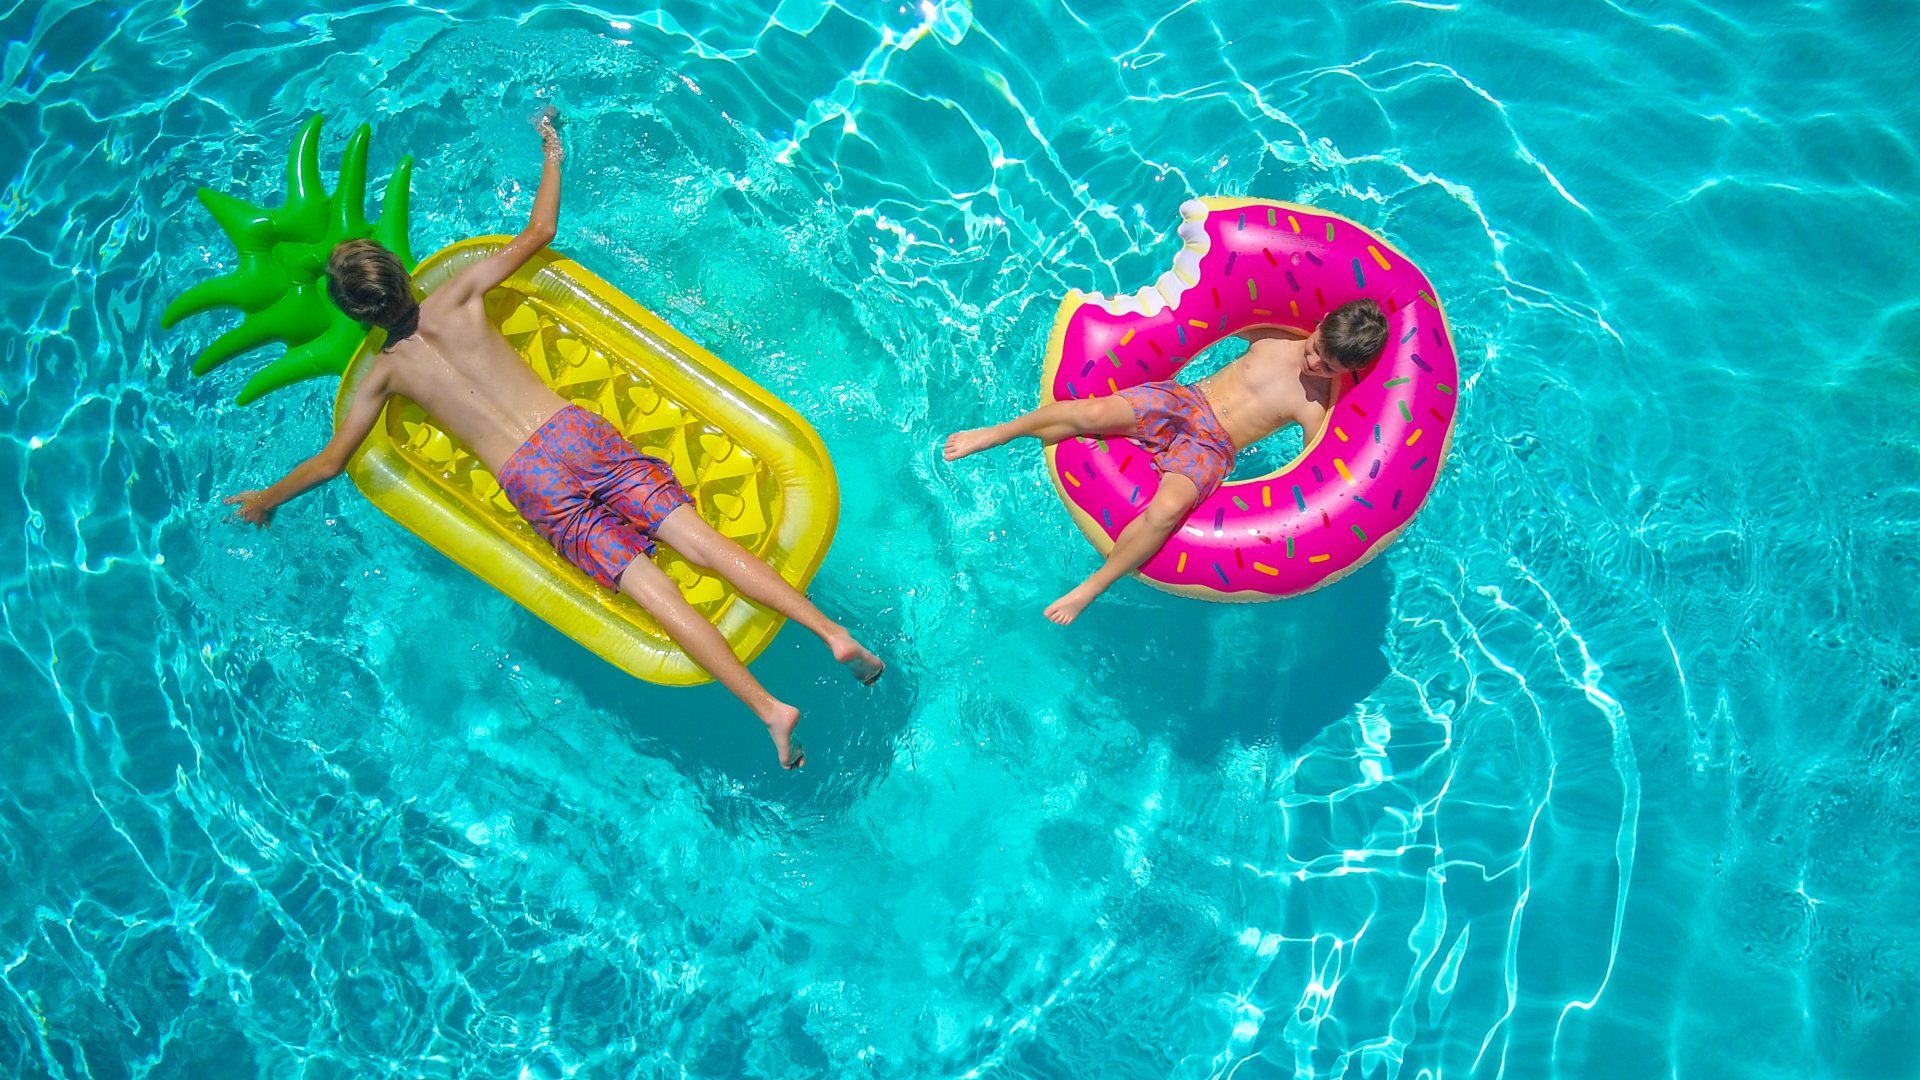 Two kids on inflatable pool floats